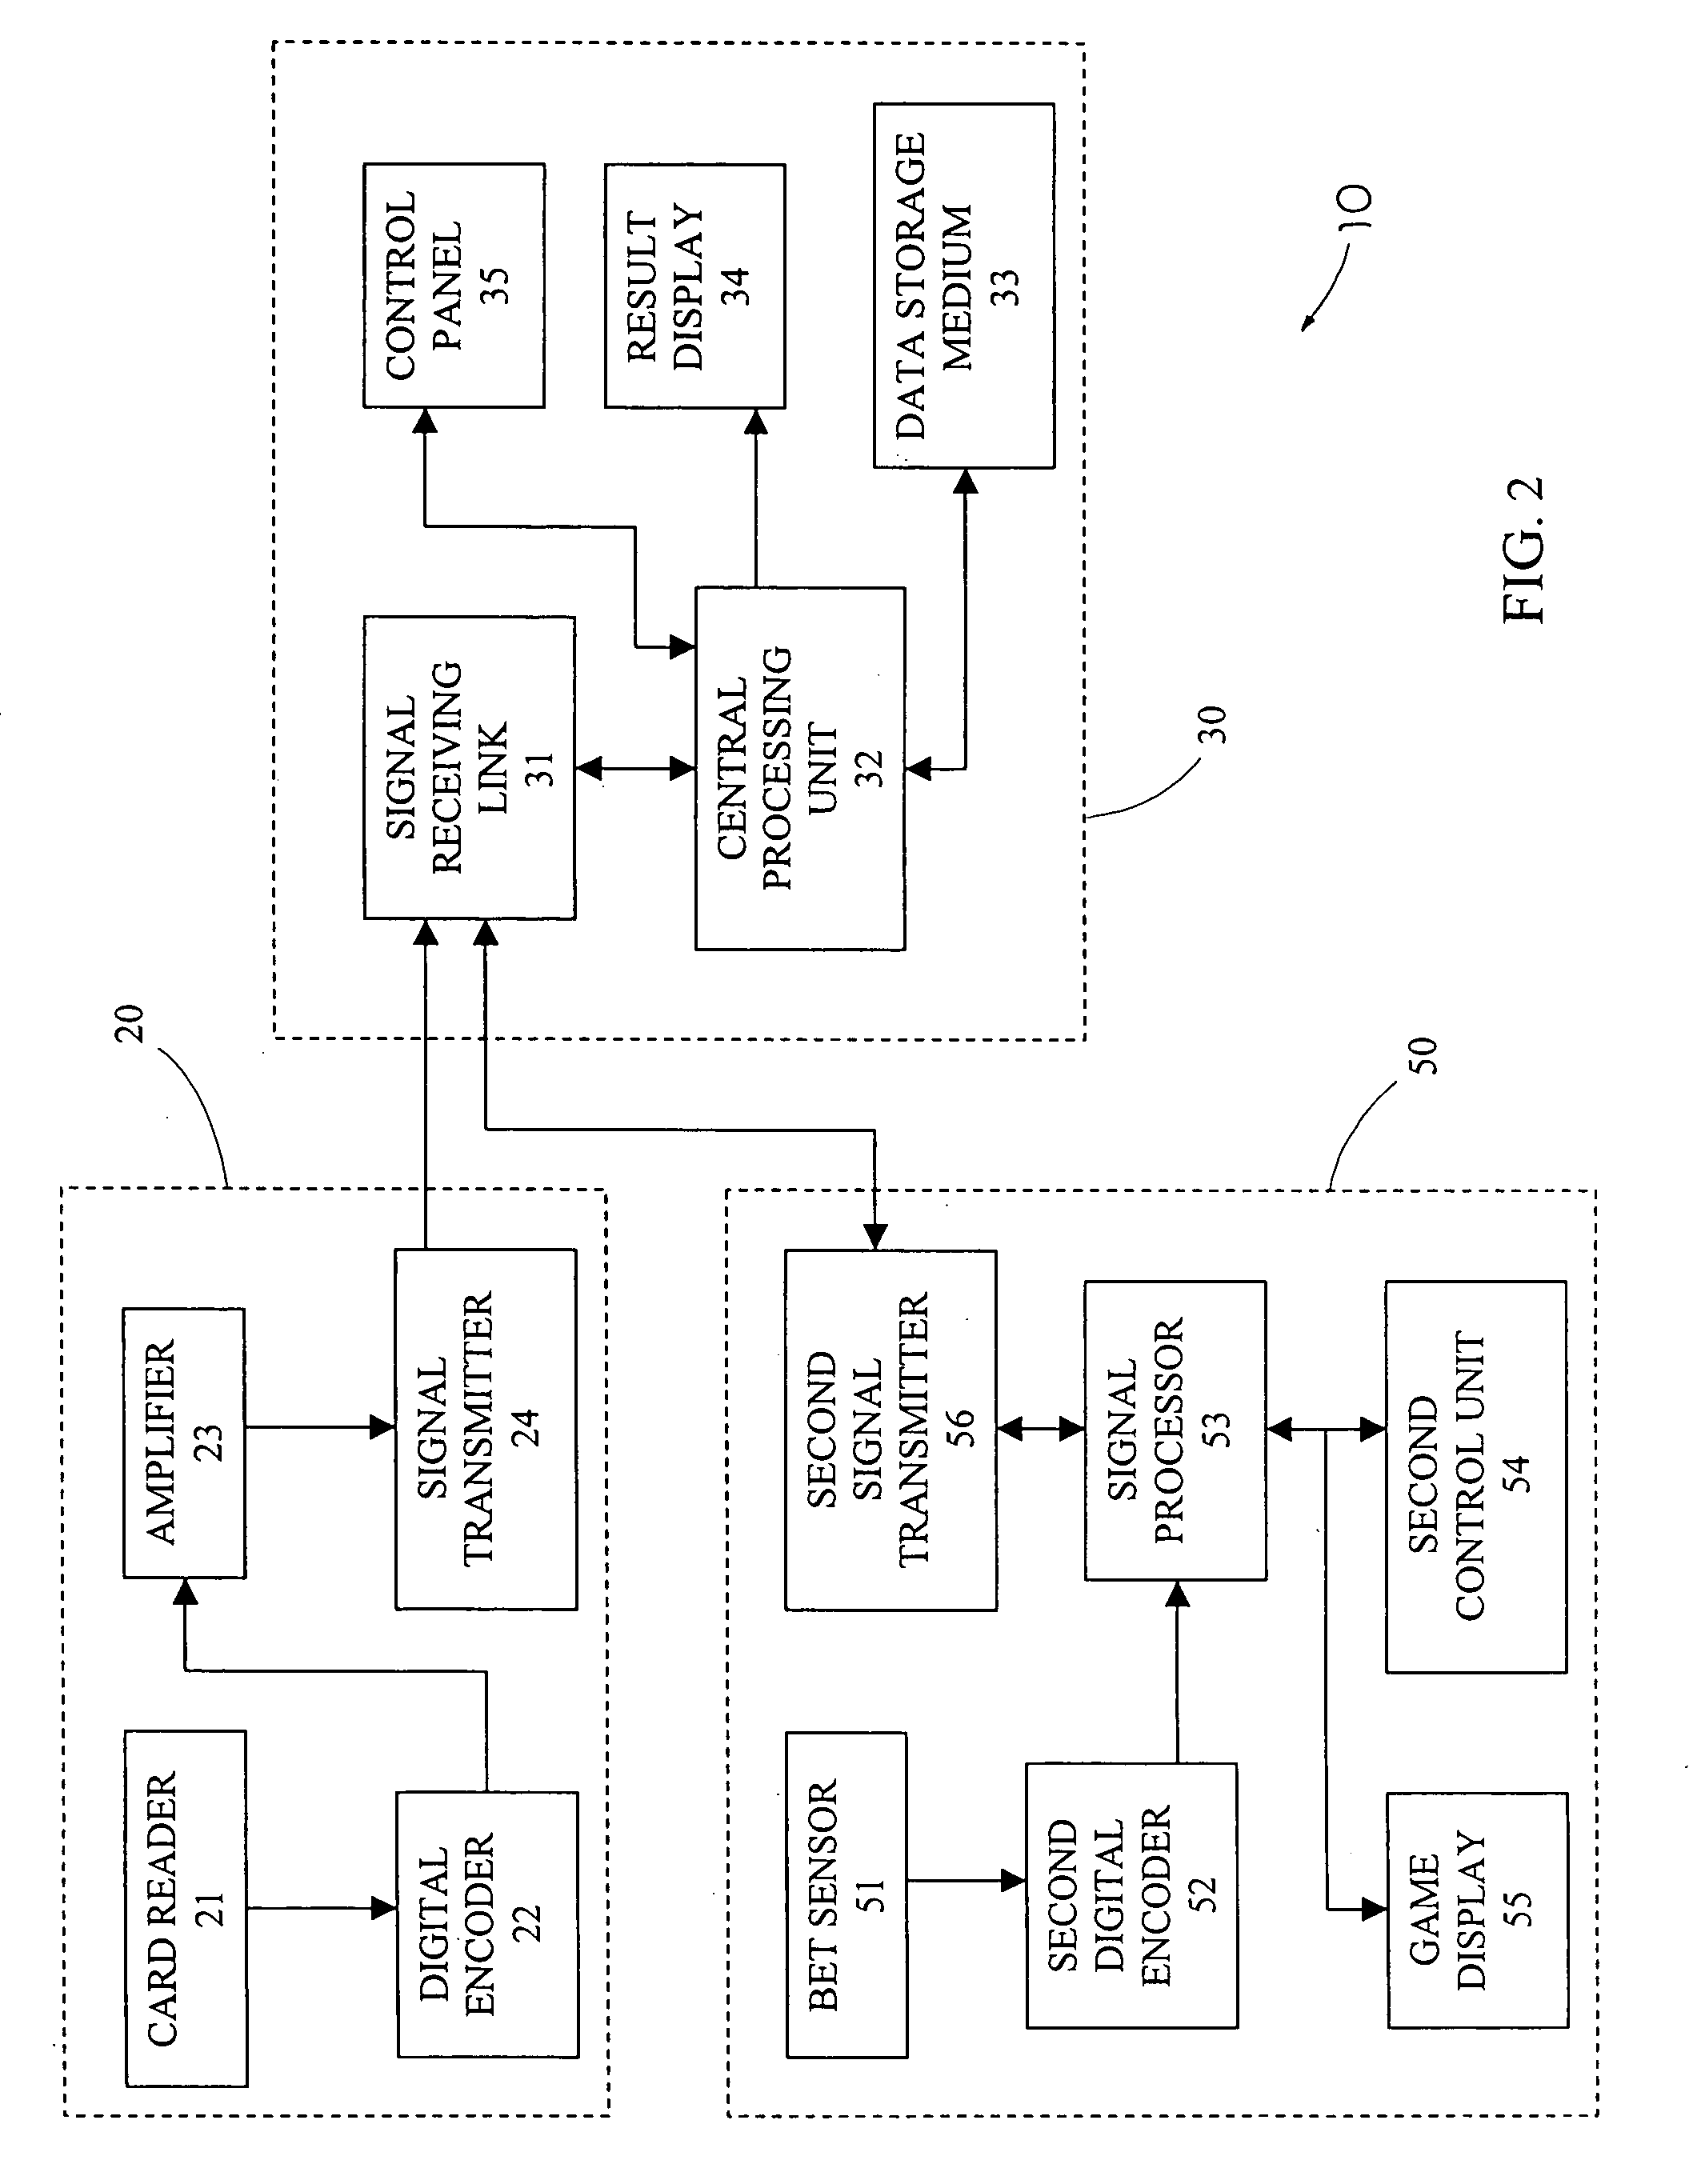 Poker dealing device incorporated with digital recorder system